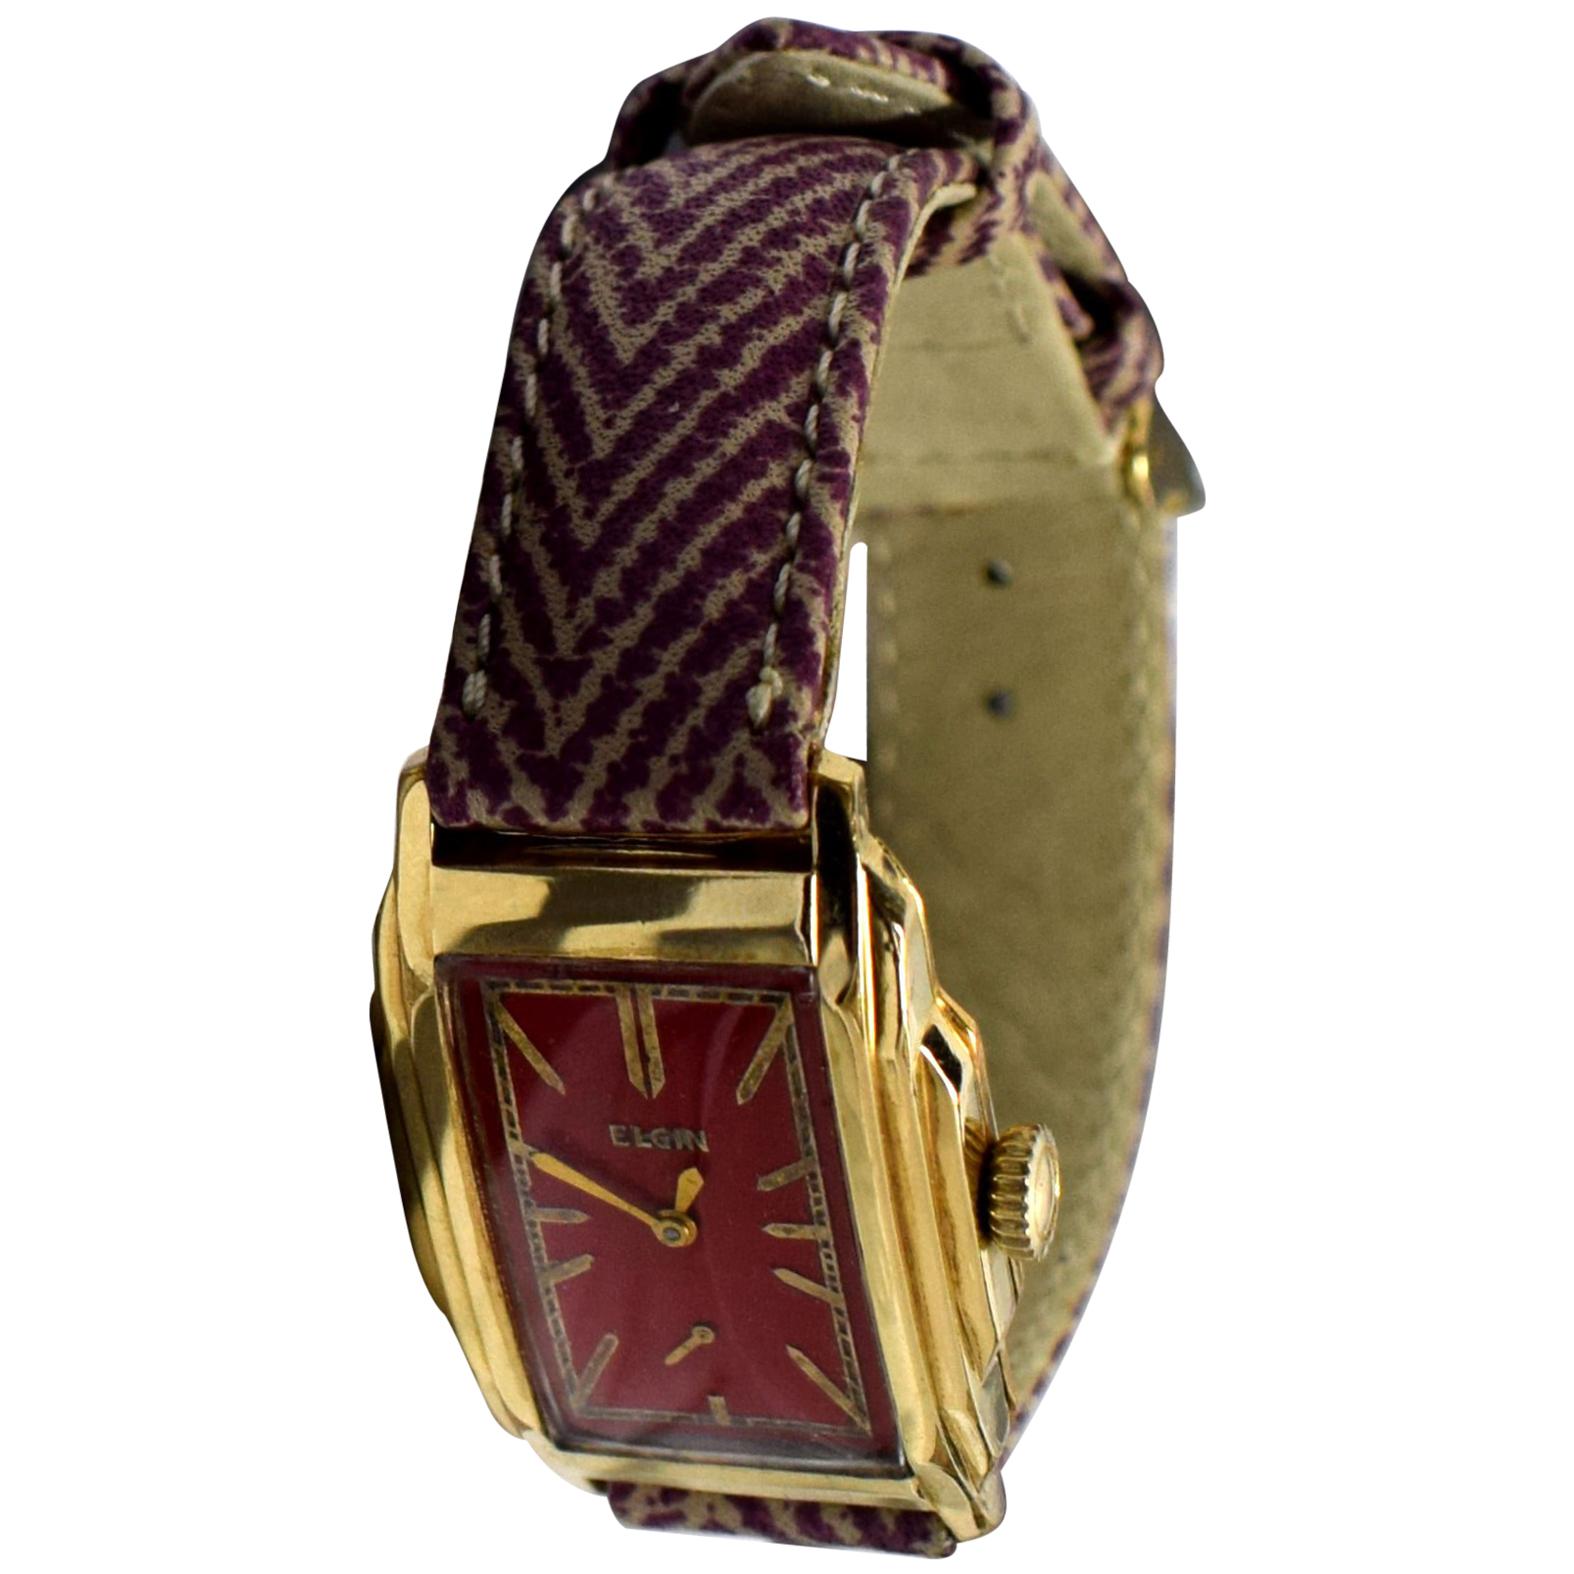 North American Art Deco 14-Karat Gold Cherry Red Gents Wristwatch by Elgin, Newly Serviced